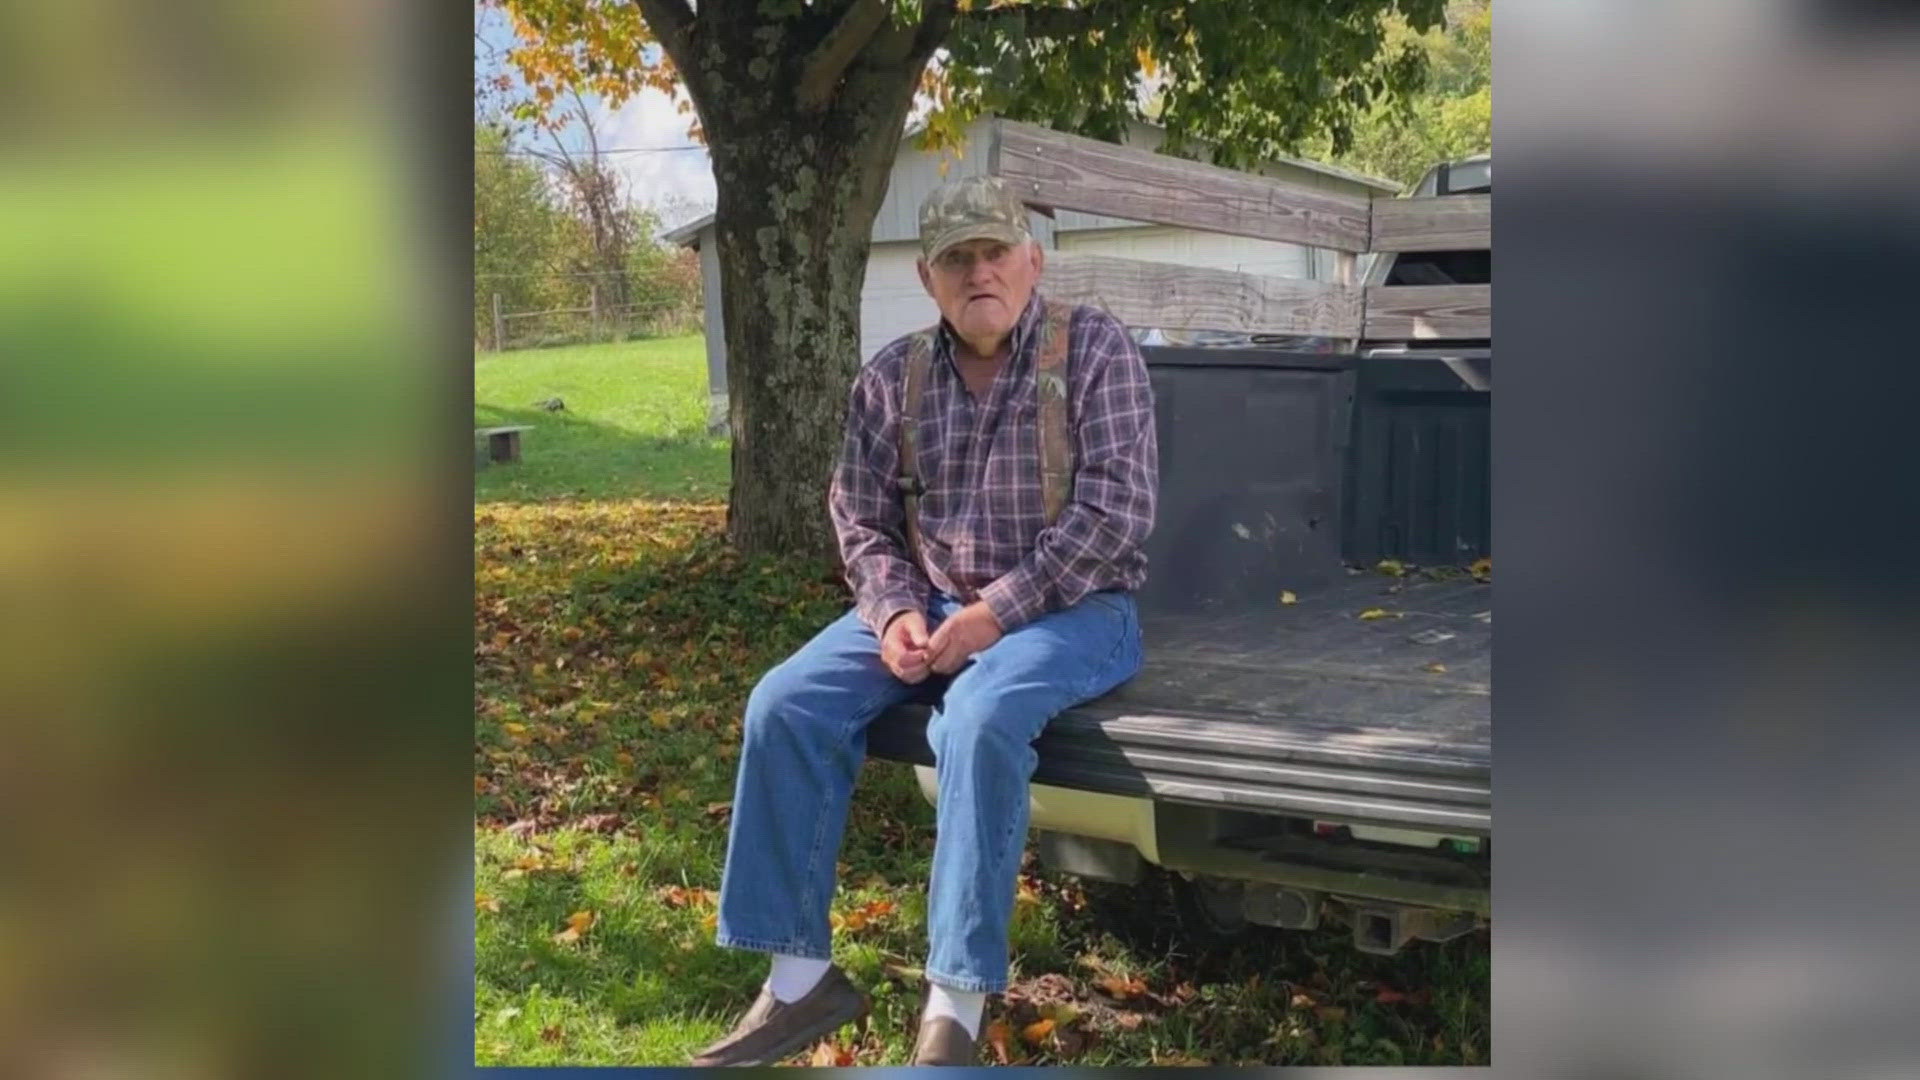 The Guernsey County Sheriff said, “This is not the outcome that anyone wanted, and my condolences go out to Mr. Sigman’s family at this difficult time."